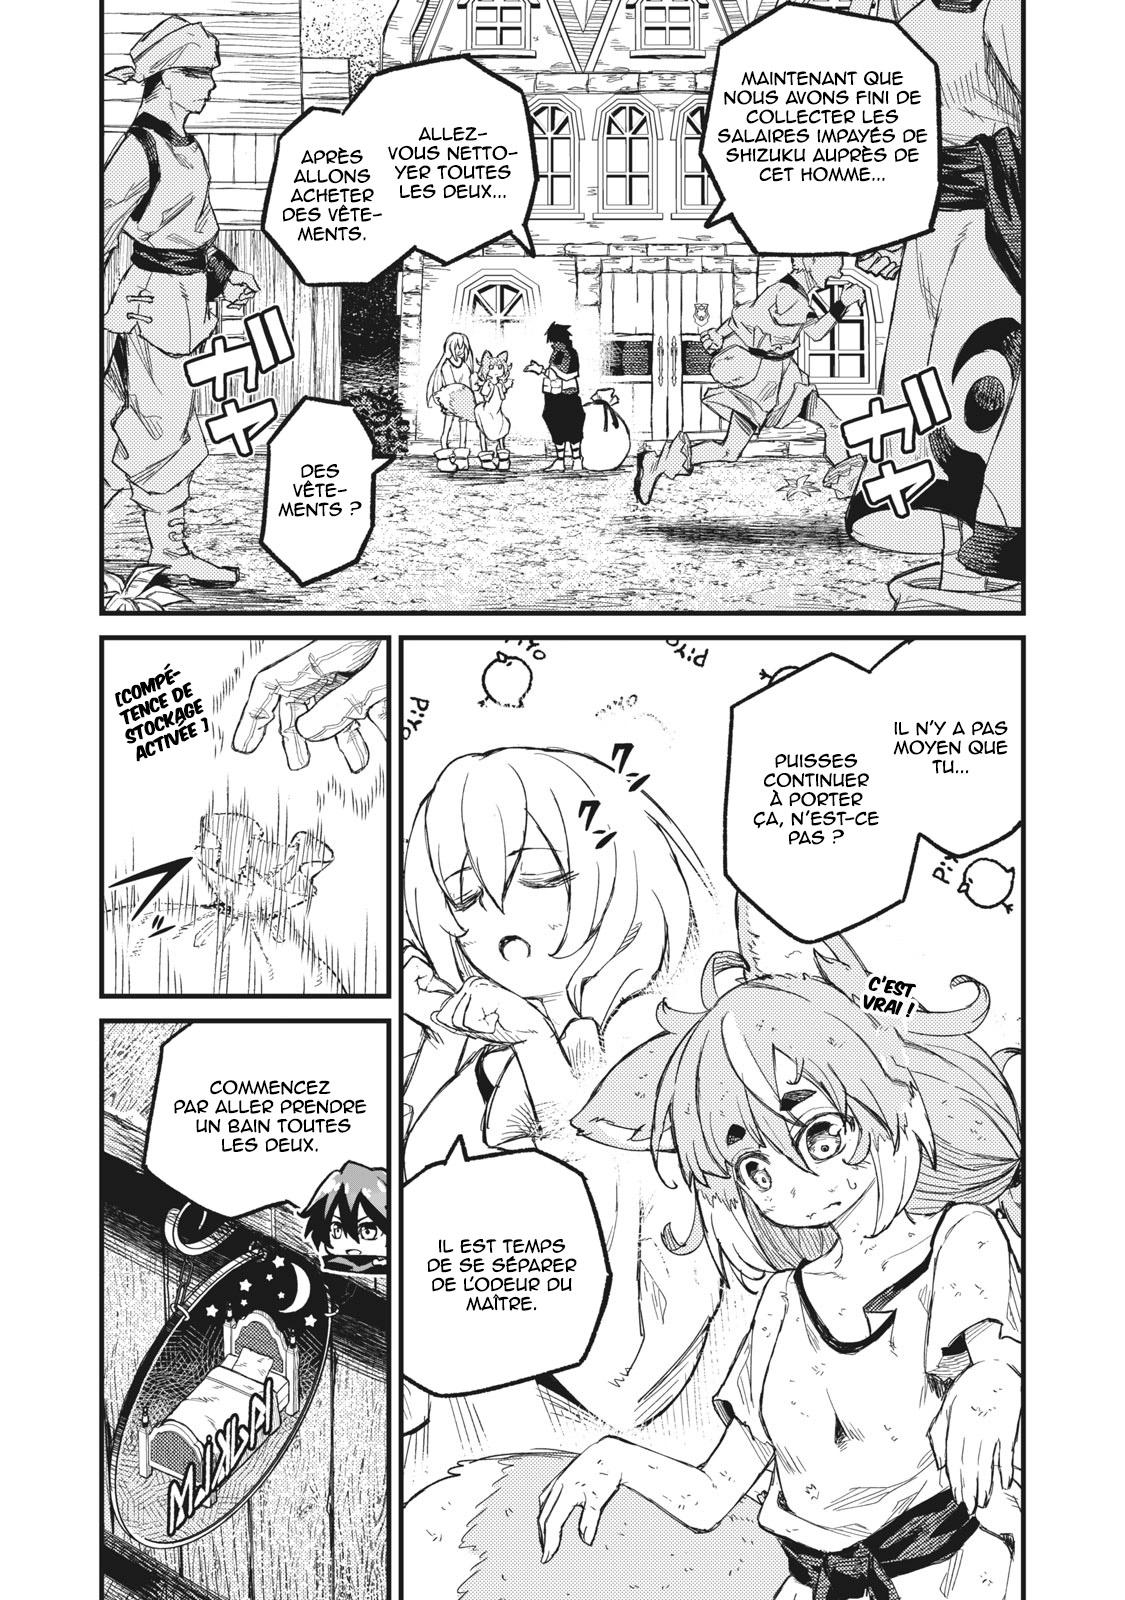 Skill Lender's Retrieving (Tale) ～I Told You It's 10% Per 10 Days At First, Didn't I～: Chapter 7 - Page 1